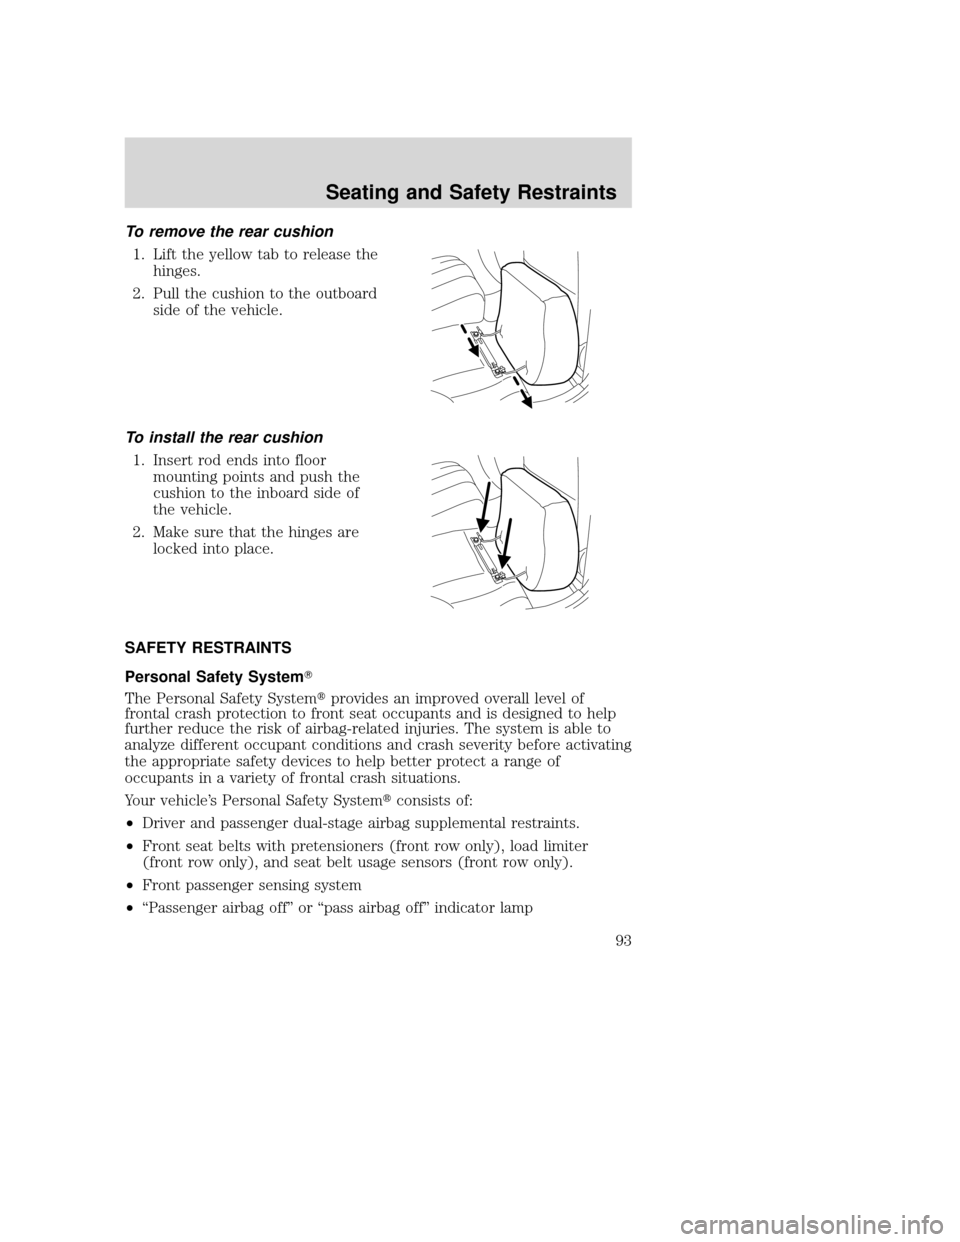 MAZDA MODEL TRIBUTE 2009  Owners Manual (in English) To remove the rear cushion1. Lift the yellow tab to release the hinges.
2. Pull the cushion to the outboard side of the vehicle.
To install the rear cushion 1. Insert rod ends into floor mounting poin